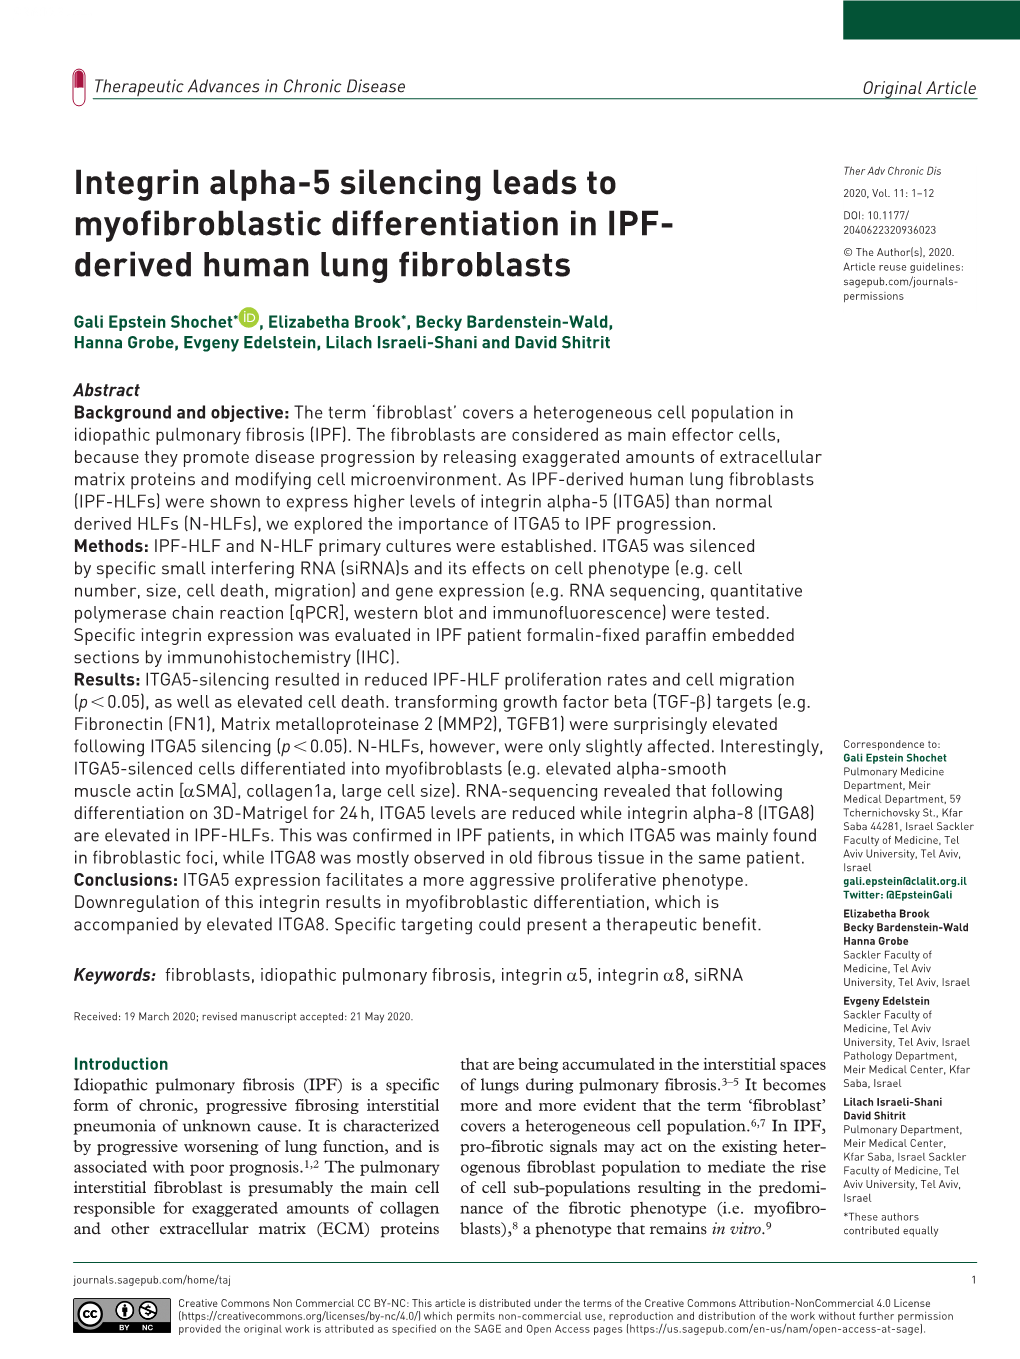 Integrin Alpha-5 Silencing Leads to Myofibroblastic Differentiation In